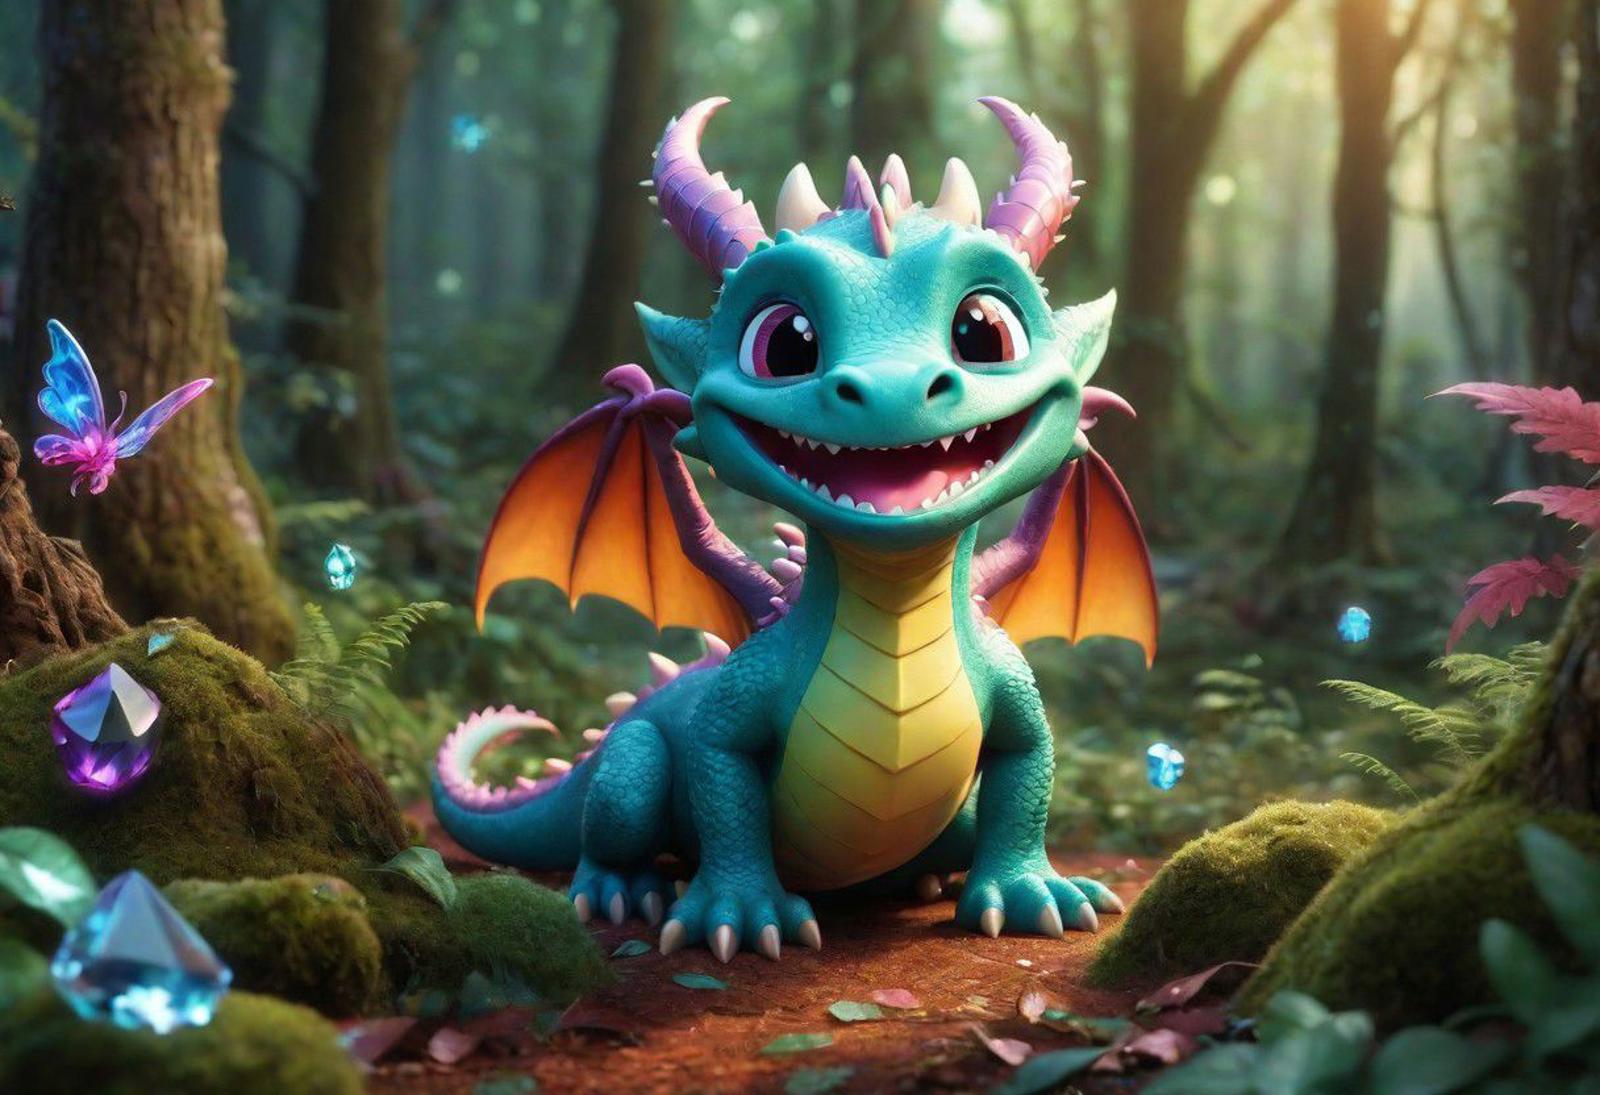 a small dragon smiling, in a forest, with faeries, fantasy, 3D render, Disney, Pixar, gorgeous, beautiful, crystals, color...